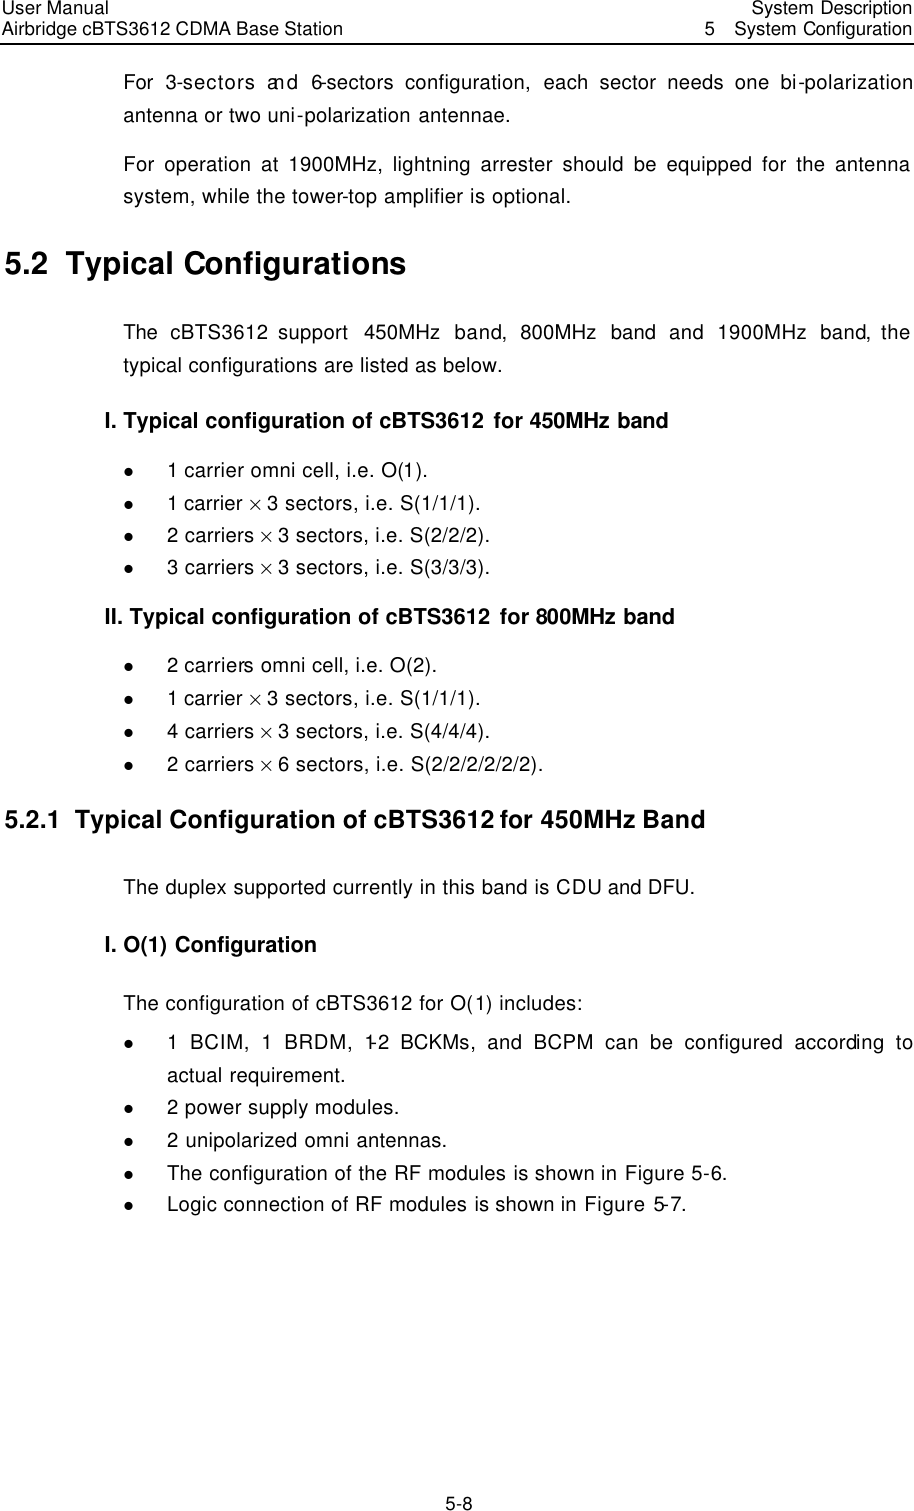 User Manual Airbridge cBTS3612 CDMA Base Station   System Description5  System Configuration 5-8 For 3-sectors and 6-sectors configuration, each sector needs one bi-polarization antenna or two uni-polarization antennae. For operation at 1900MHz, lightning arrester should be equipped for the antenna system, while the tower-top amplifier is optional. 5.2  Typical Configurations The  cBTS3612 support  450MHz band,  800MHz band and 1900MHz band, the typical configurations are listed as below. I. Typical configuration of cBTS3612 for 450MHz band l 1 carrier omni cell, i.e. O(1).   l 1 carrier % 3 sectors, i.e. S(1/1/1).   l 2 carriers % 3 sectors, i.e. S(2/2/2).   l 3 carriers % 3 sectors, i.e. S(3/3/3).   II. Typical configuration of cBTS3612 for 800MHz band l 2 carriers omni cell, i.e. O(2).   l 1 carrier % 3 sectors, i.e. S(1/1/1).   l 4 carriers % 3 sectors, i.e. S(4/4/4).   l 2 carriers % 6 sectors, i.e. S(2/2/2/2/2/2).   5.2.1  Typical Configuration of cBTS3612 for 450MHz Band The duplex supported currently in this band is CDU and DFU. I. O(1) Configuration The configuration of cBTS3612 for O(1) includes:   l 1 BCIM, 1 BRDM, 1-2 BCKMs, and BCPM can be configured according to actual requirement.   l 2 power supply modules.   l 2 unipolarized omni antennas.   l The configuration of the RF modules is shown in Figure 5-6. l Logic connection of RF modules is shown in Figure 5-7. 